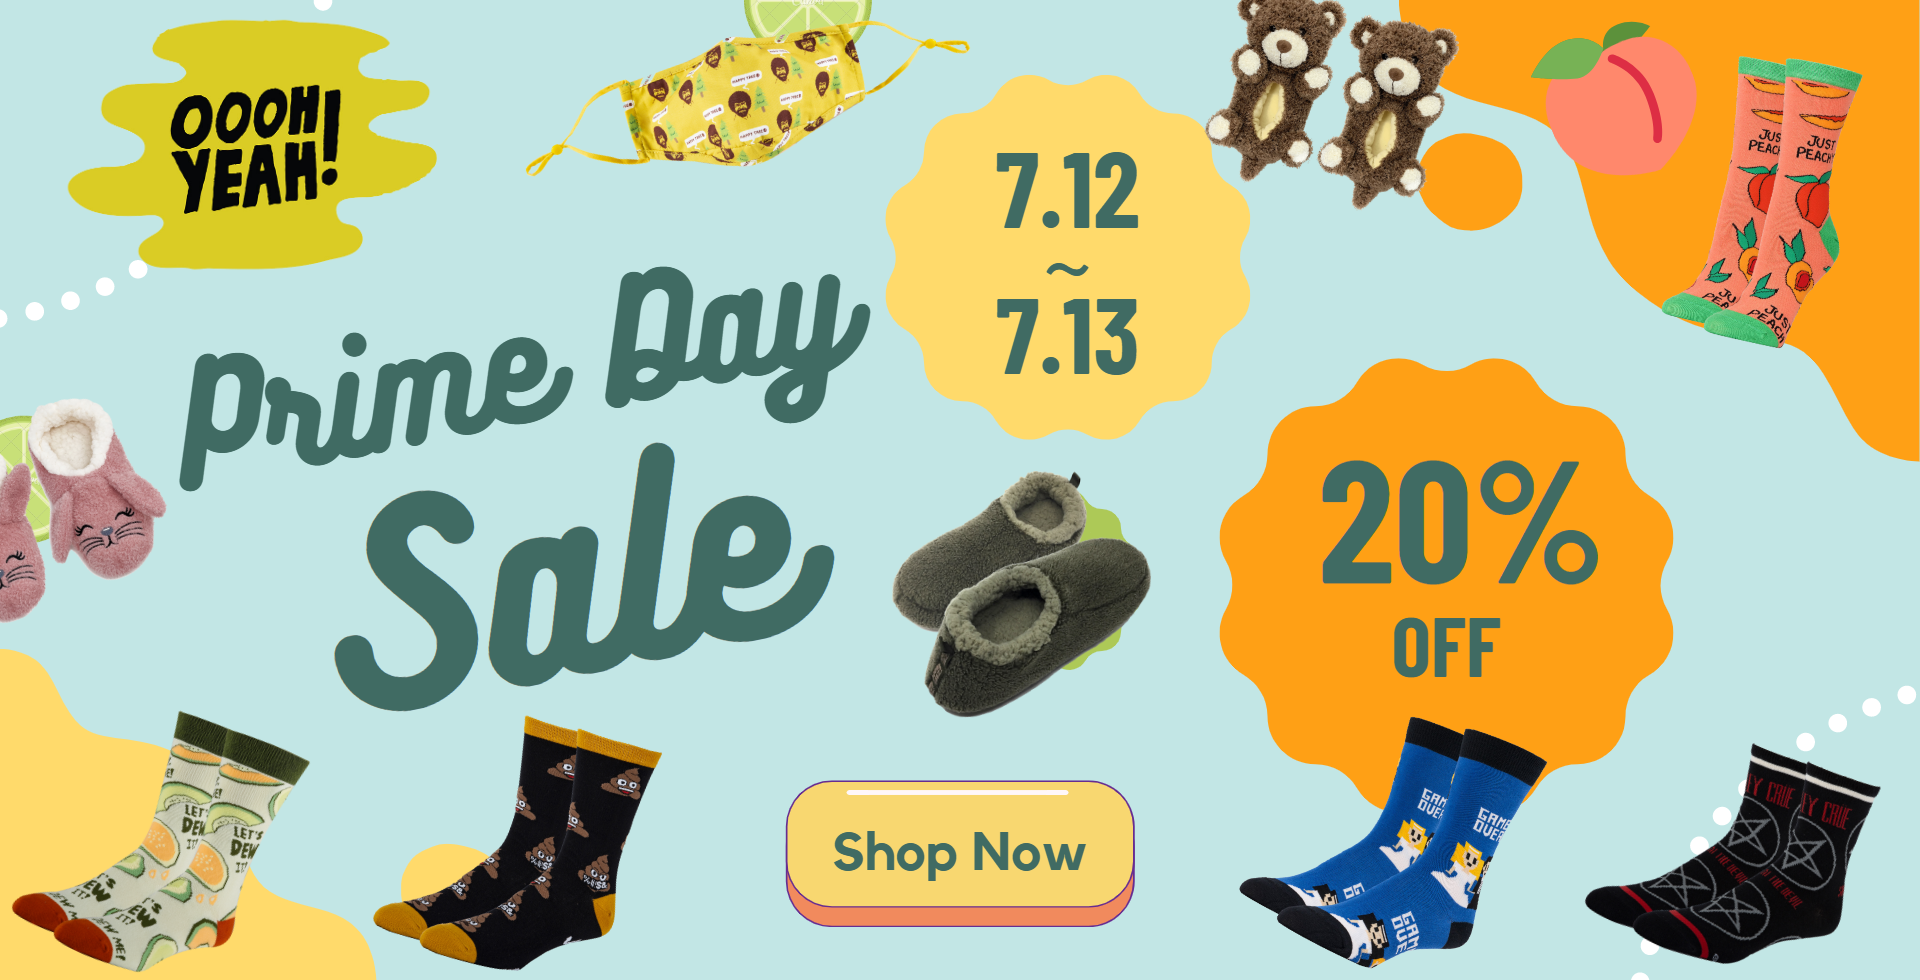 Oooh Yeah Prime Day Deals for Socks and Slippers